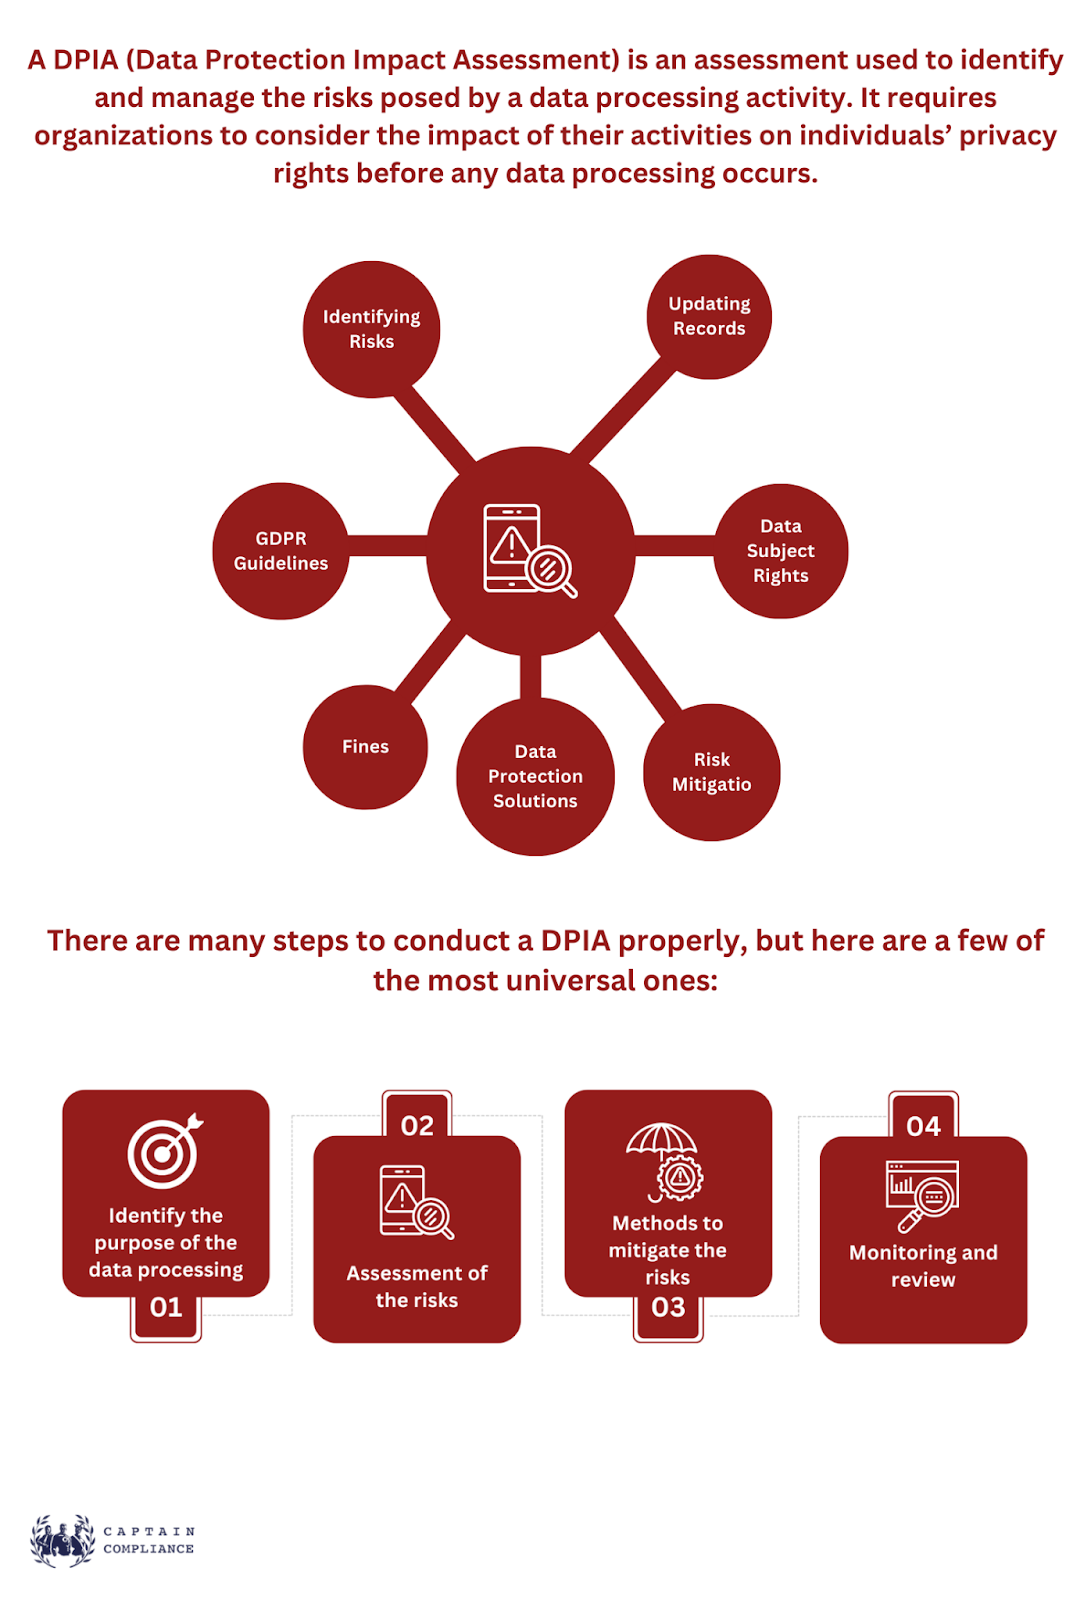 Full DPIA Guide from Captain Compliance